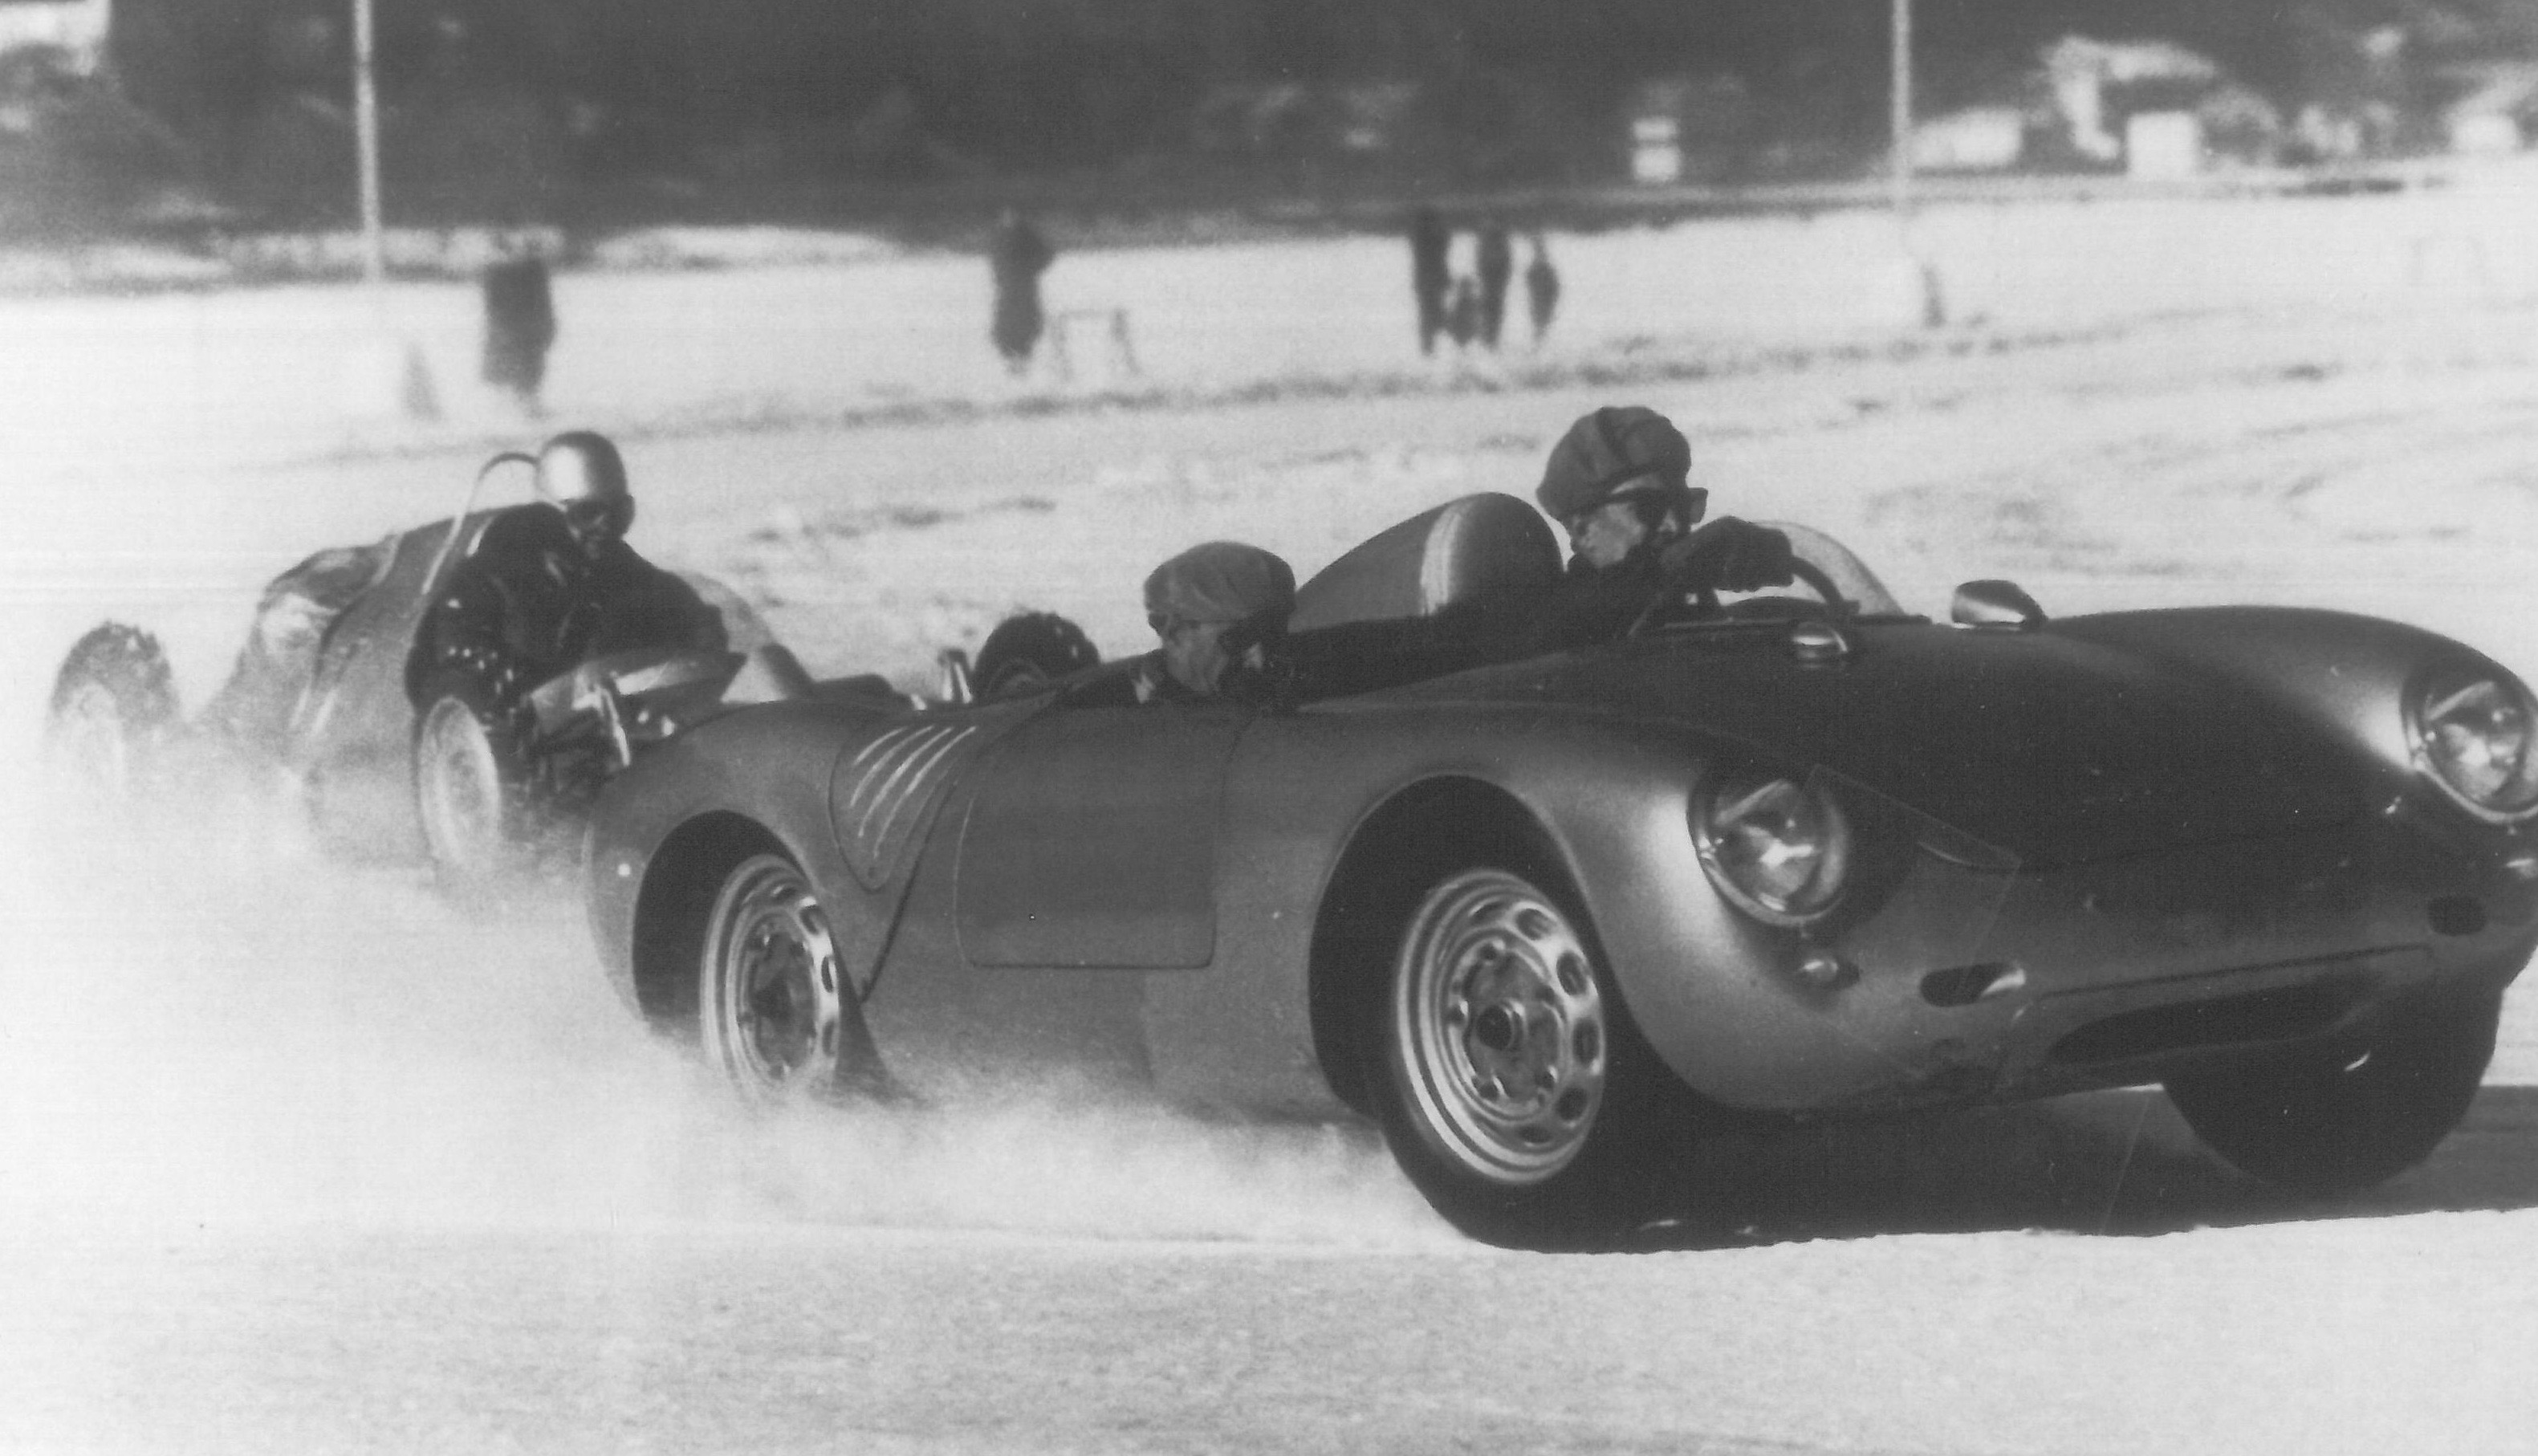 Ice races, Ice races will feature Ferry Porsche’s 550 Spyder, ClassicCars.com Journal